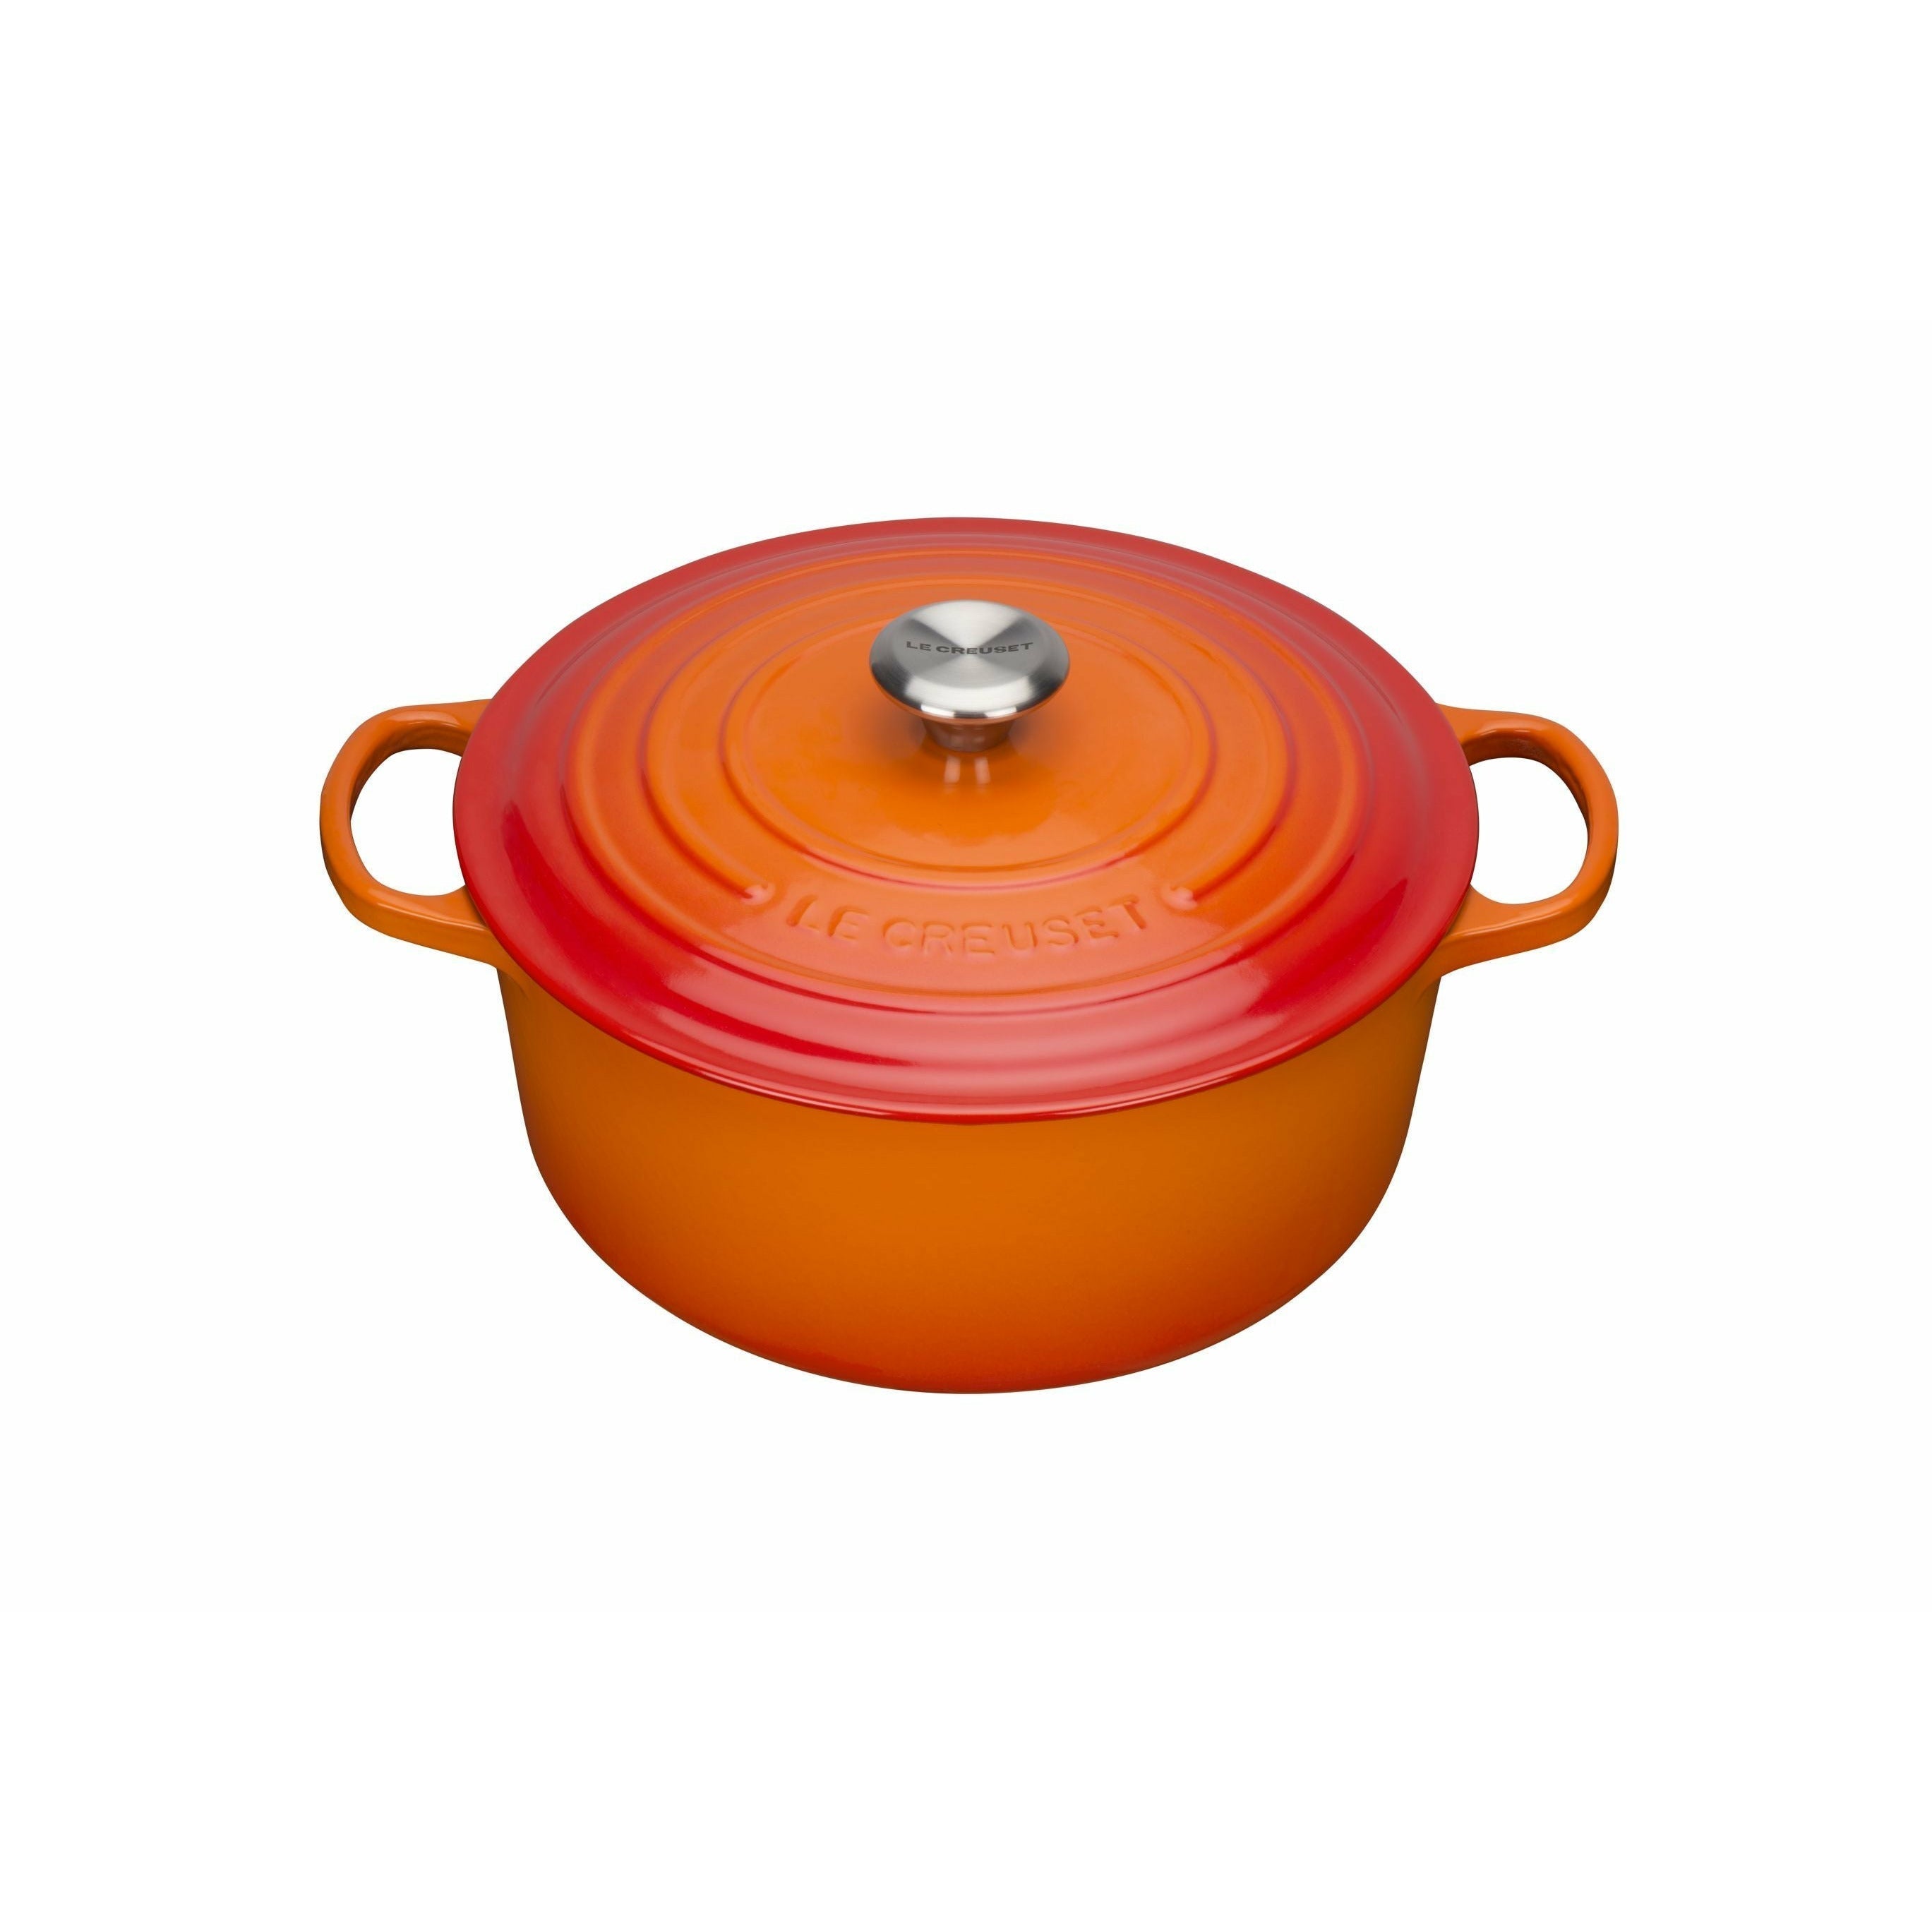 Le Creuset Signature Round Roaster 22 Cm, Oven Red